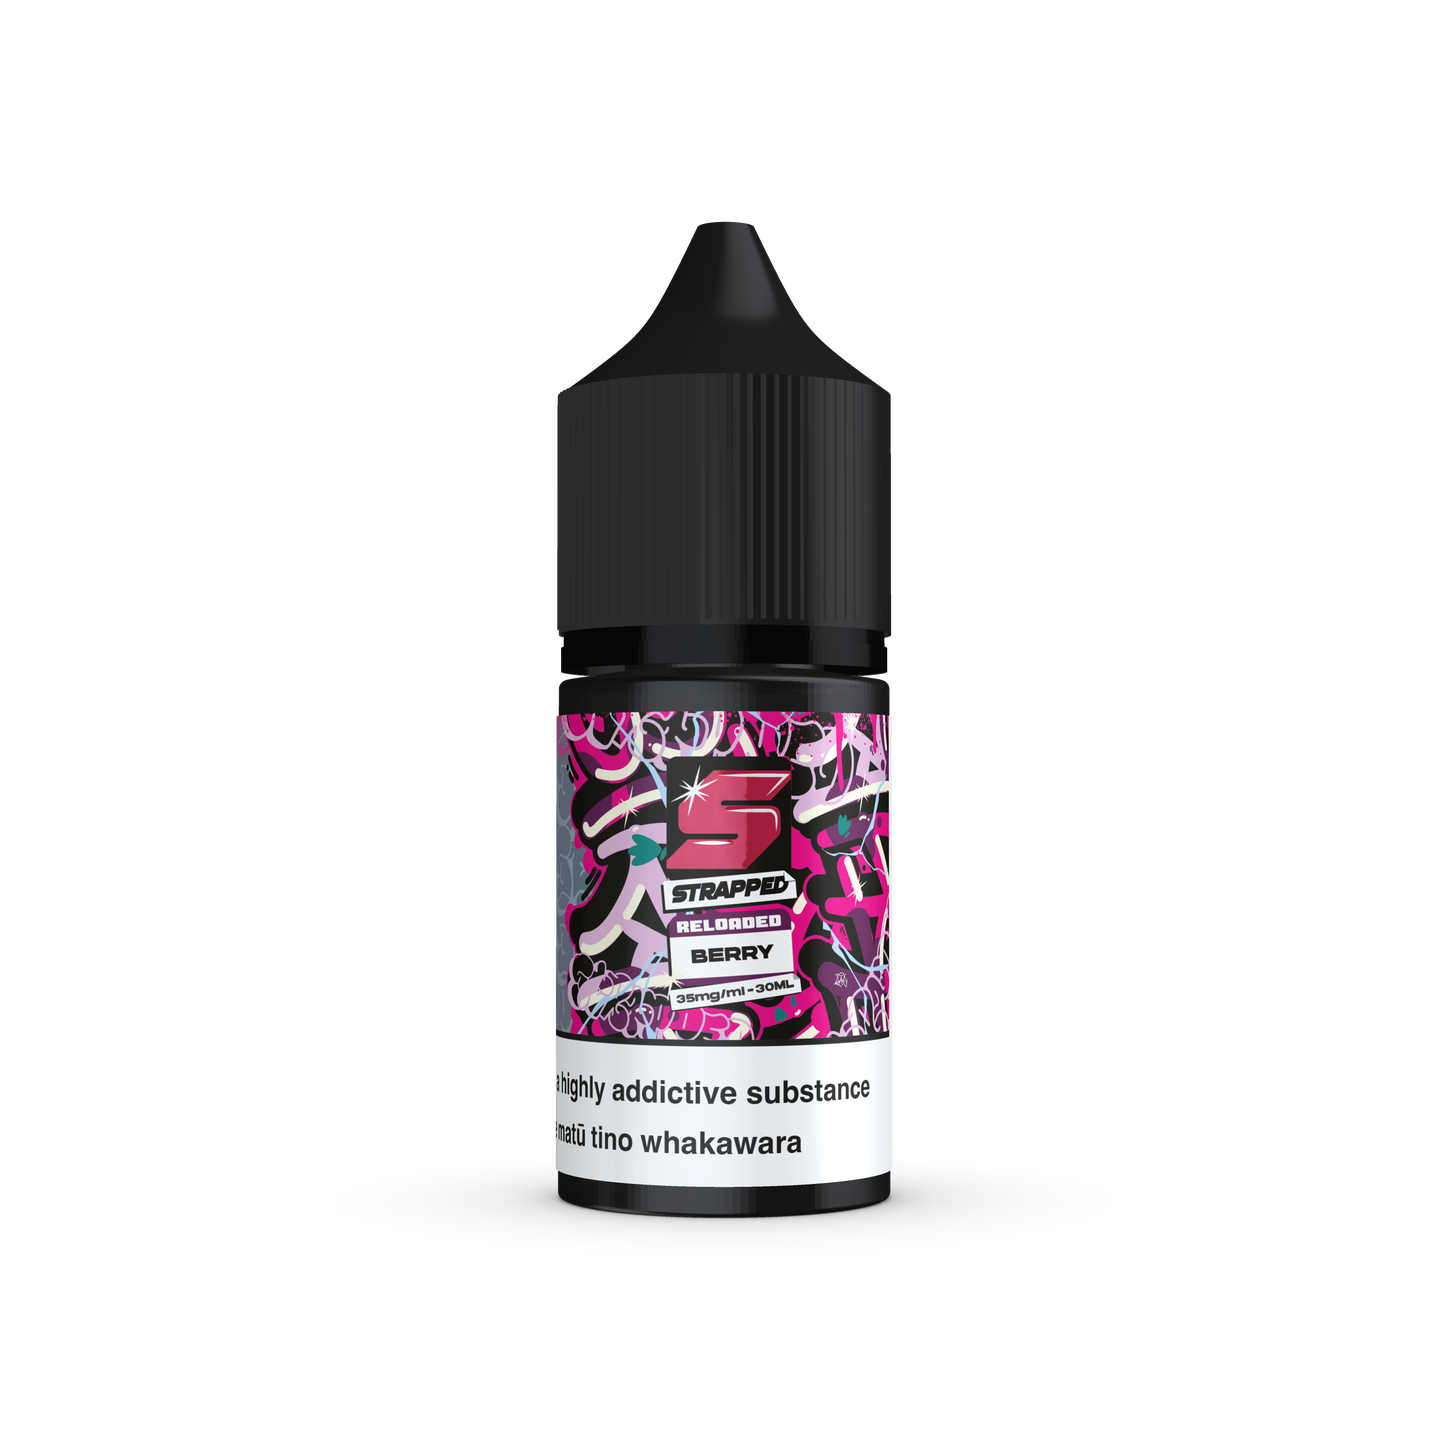 Strapped Reloaded Salts 30ml 35mg - Berry (Mixed Berry Madness)